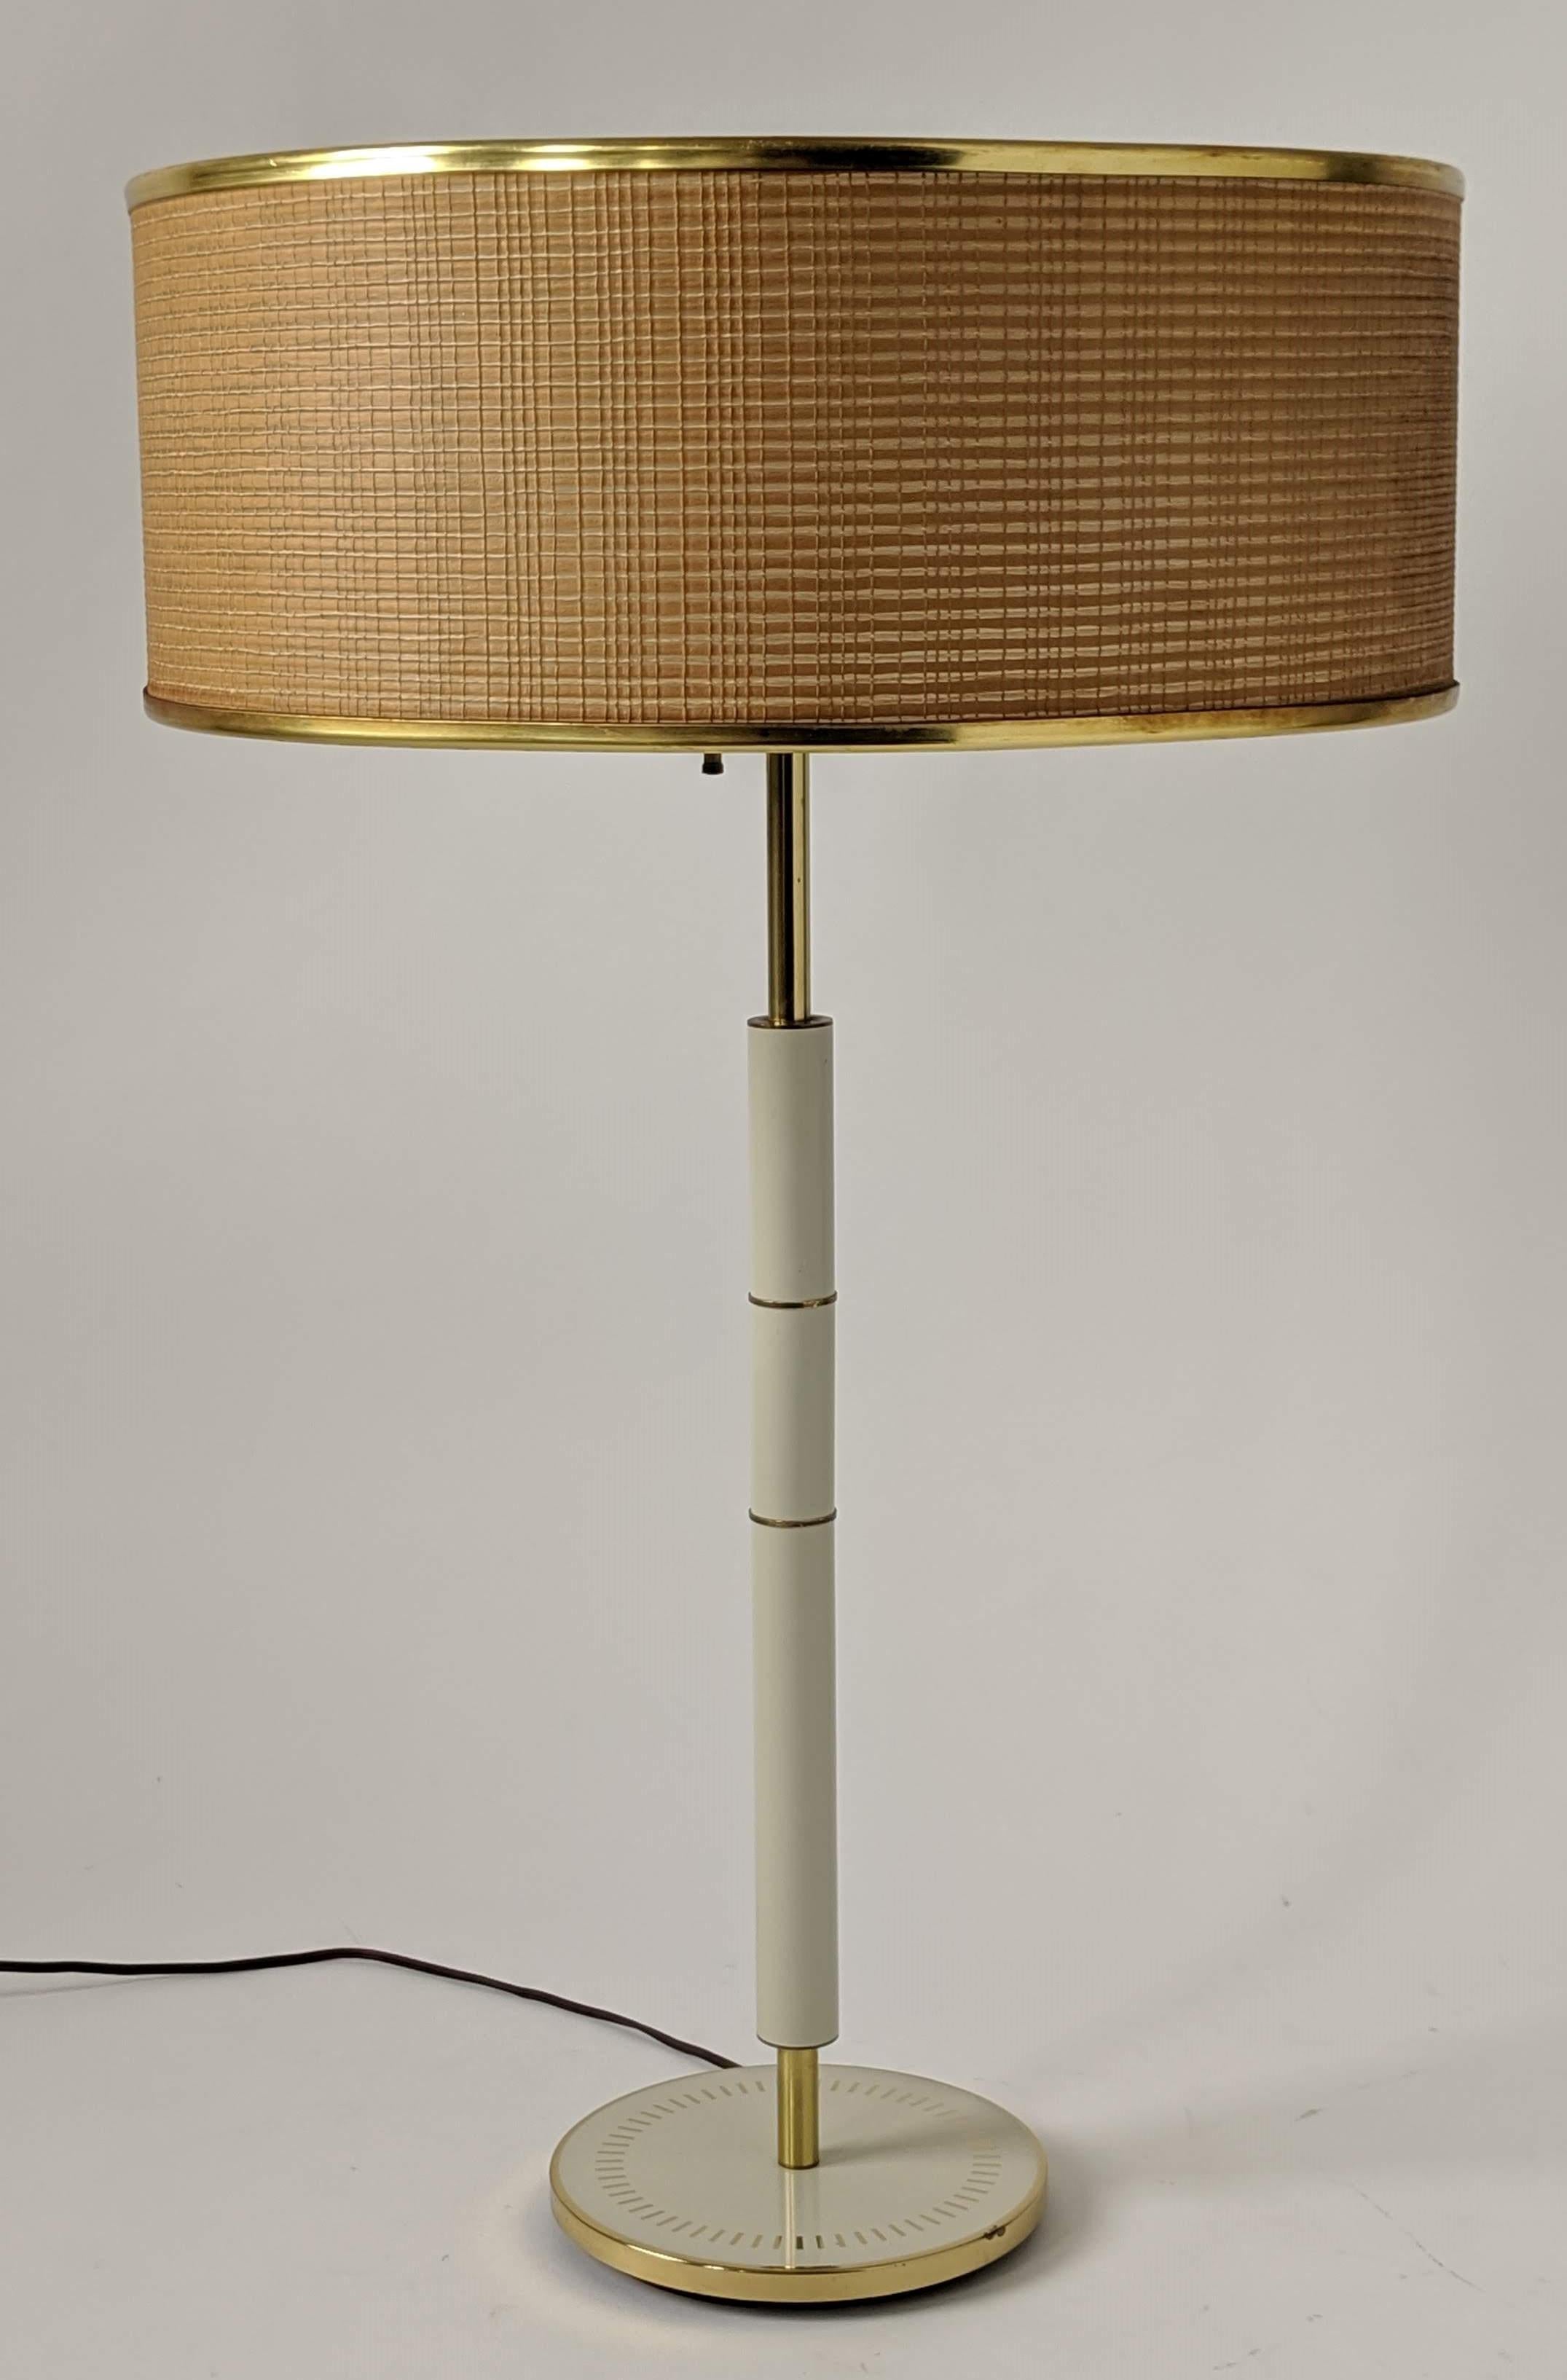 30 in. tall table lamp from Gerald Thurston for Lightolier . 

Original shade measure 18 in. wide by 7 in. high . 

Contain 3 E26 size ceramic socket rated at 60 watts each . 

Rotating switch control one , two or tree lights . 

Lightolier